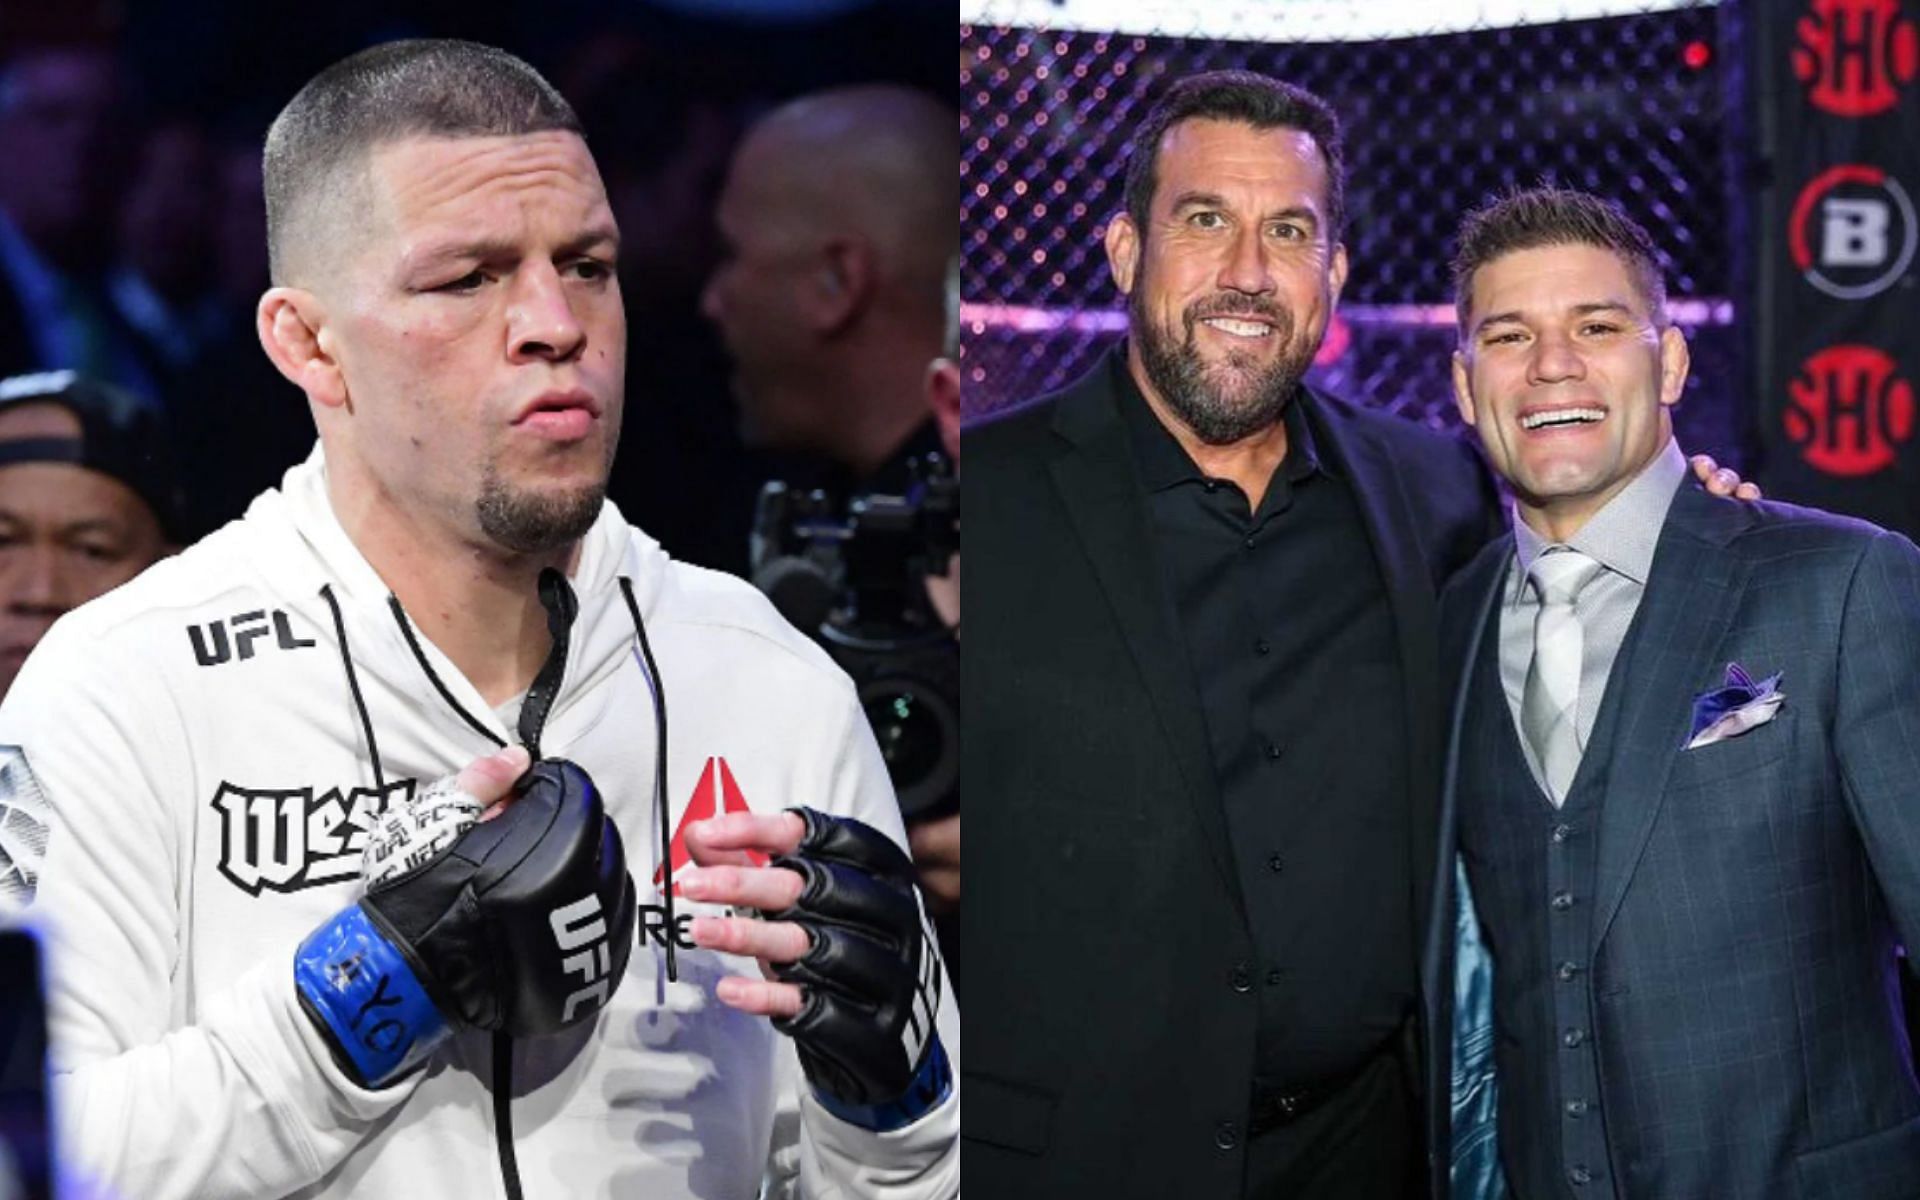 Nate Diaz (left), Josh Thomson and John McCarthy (right. Image credit: @therealpunk on Instagram)